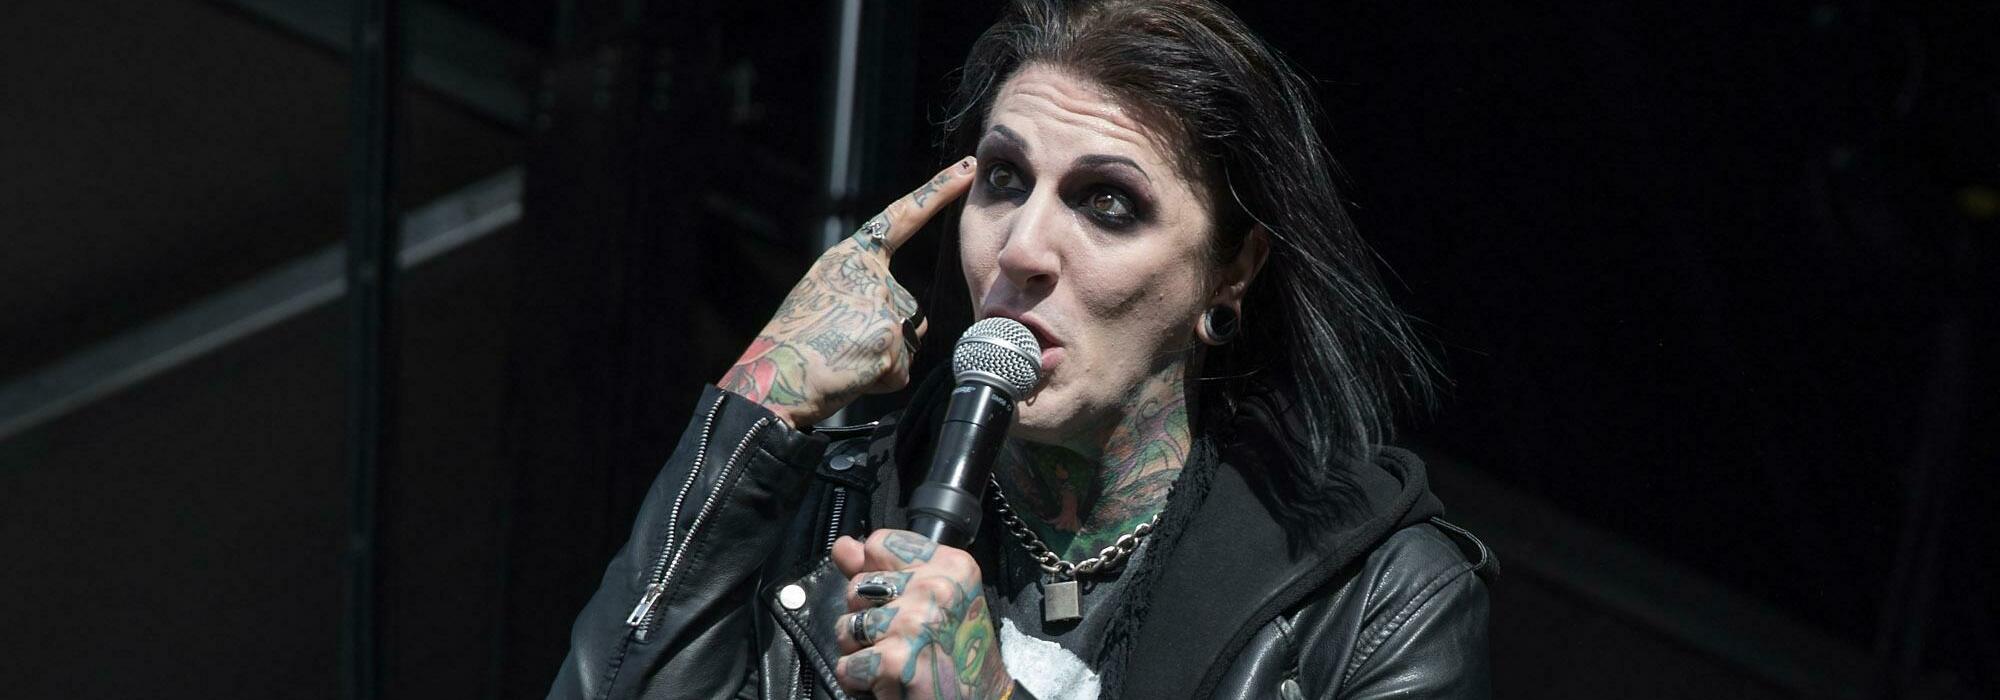 A Motionless in White live event